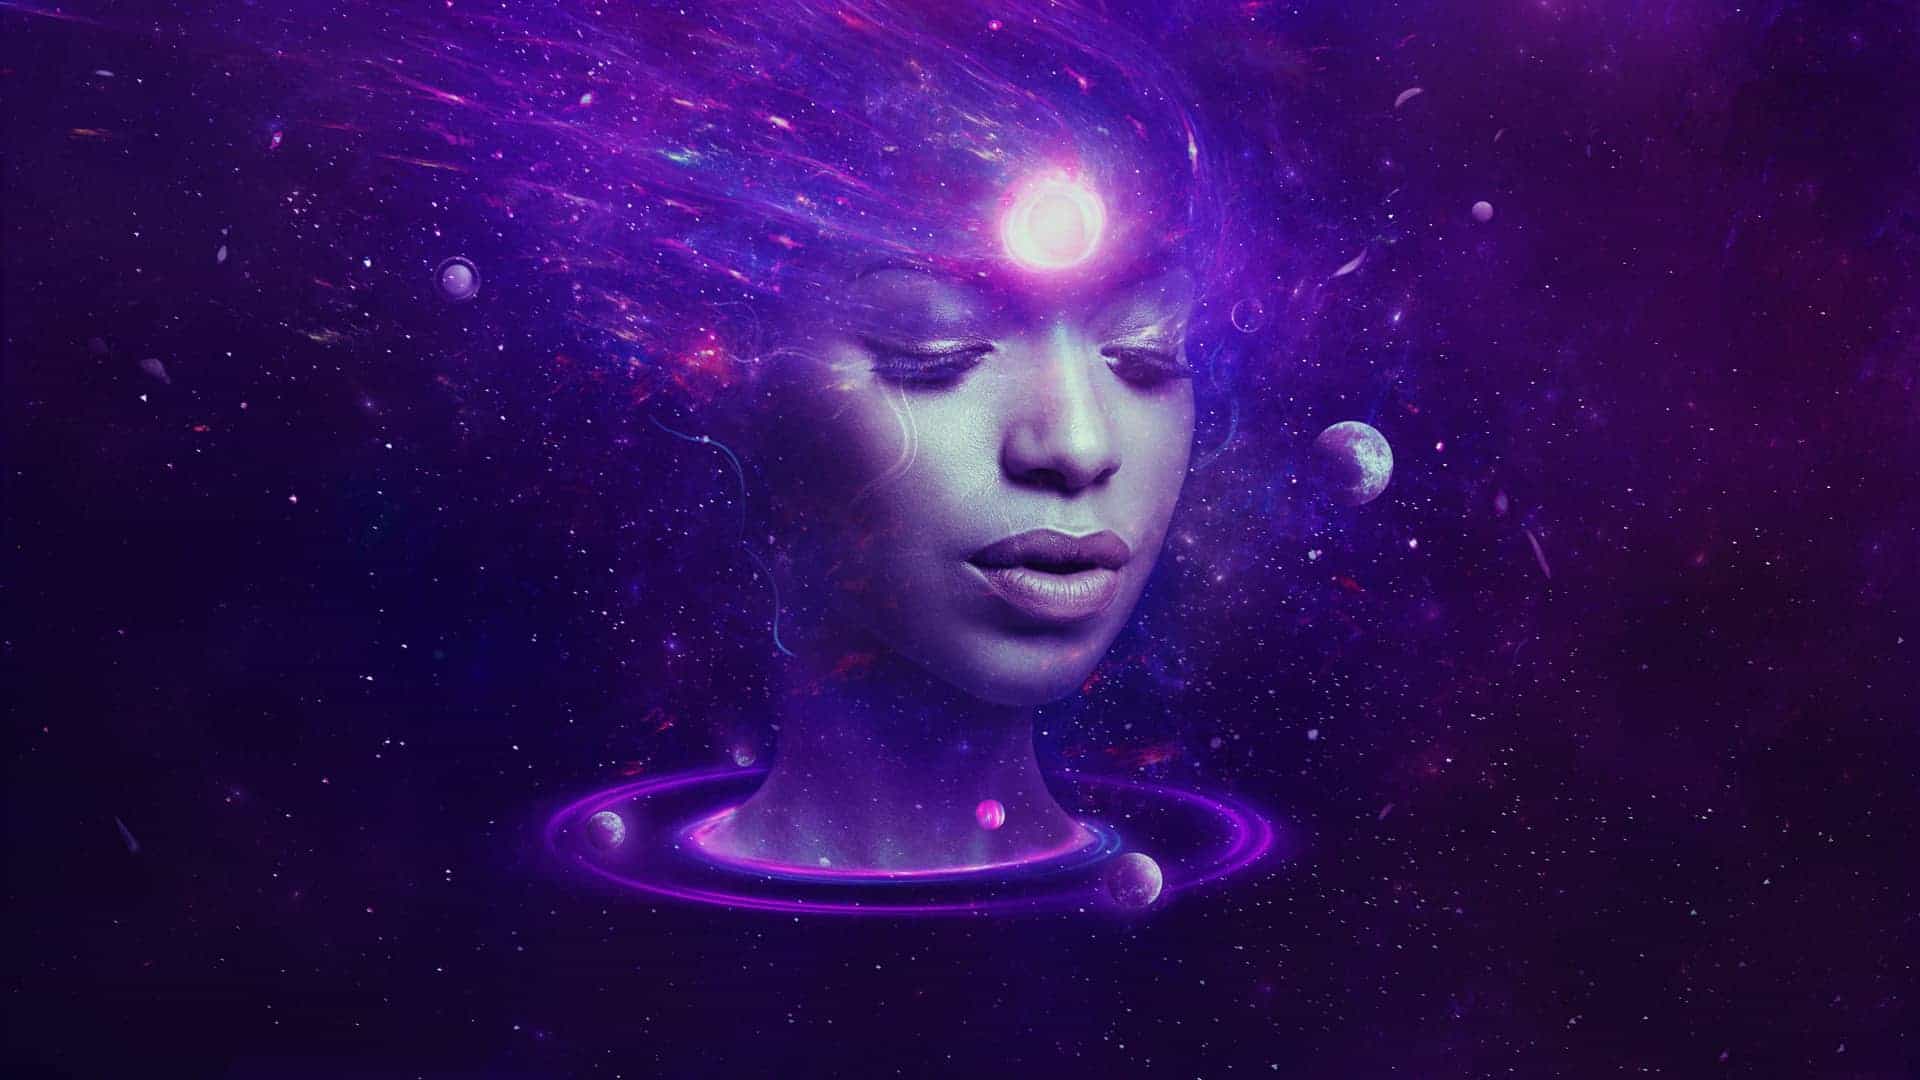 How to Create a Space Woman Portrait with Adobe Photoshop